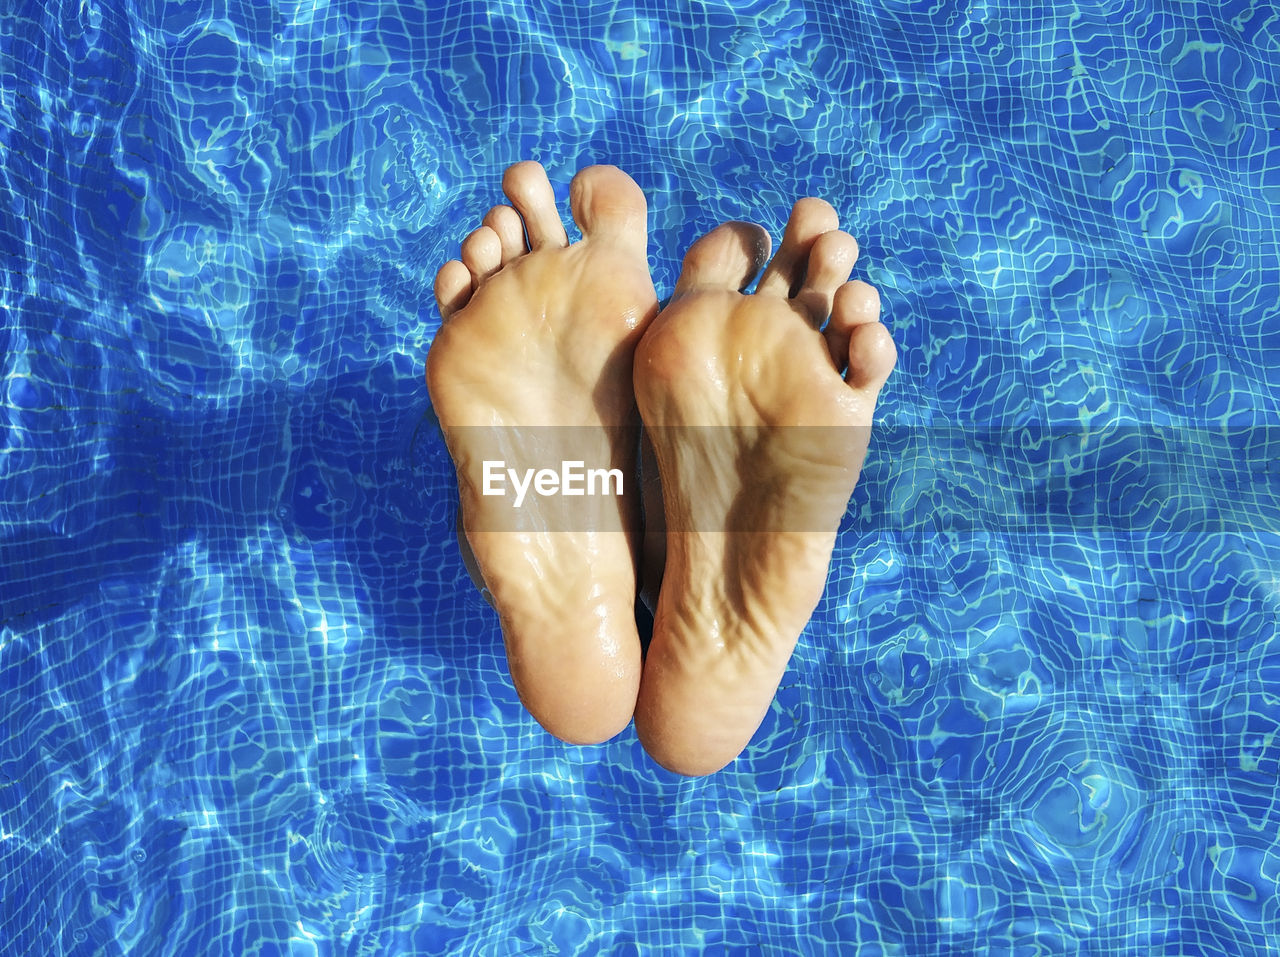 Low section of man with feet up in swimming pool